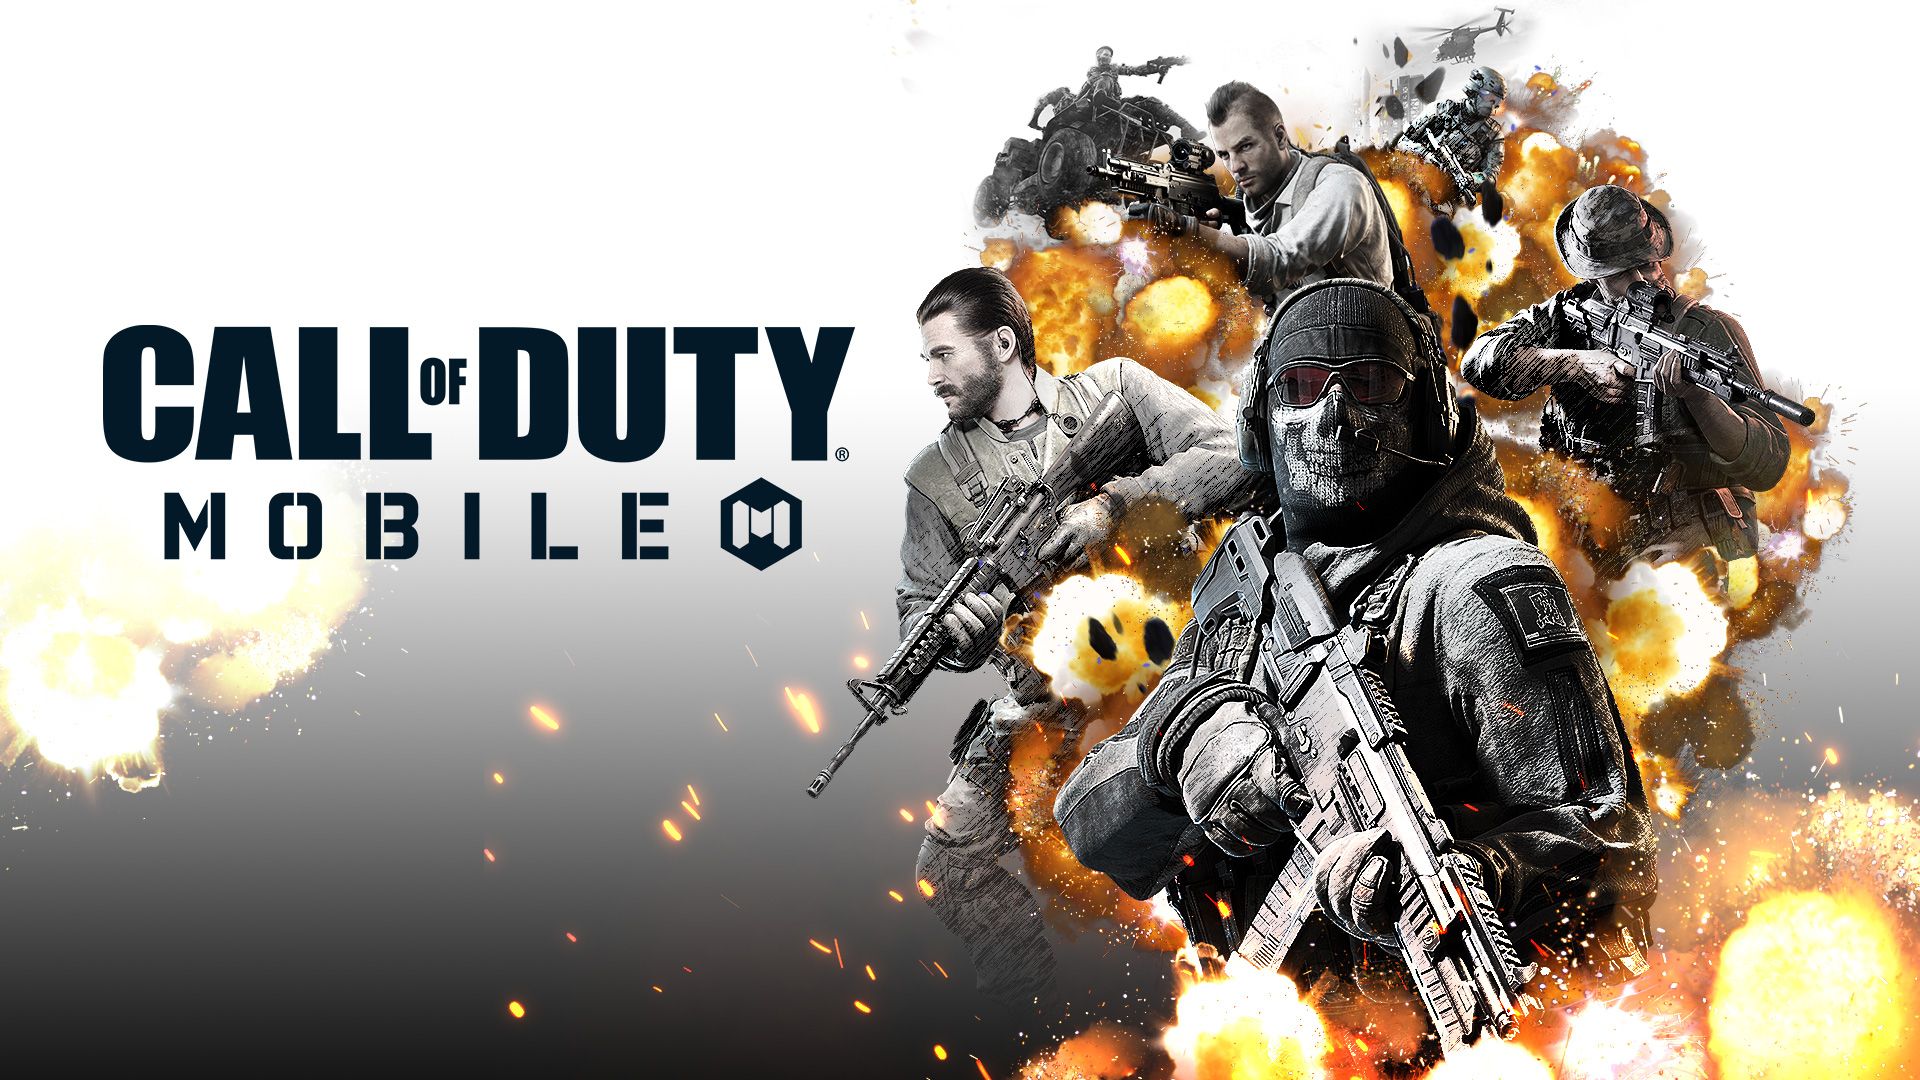 Call of Duty: Mobile (Price: Free to Play)